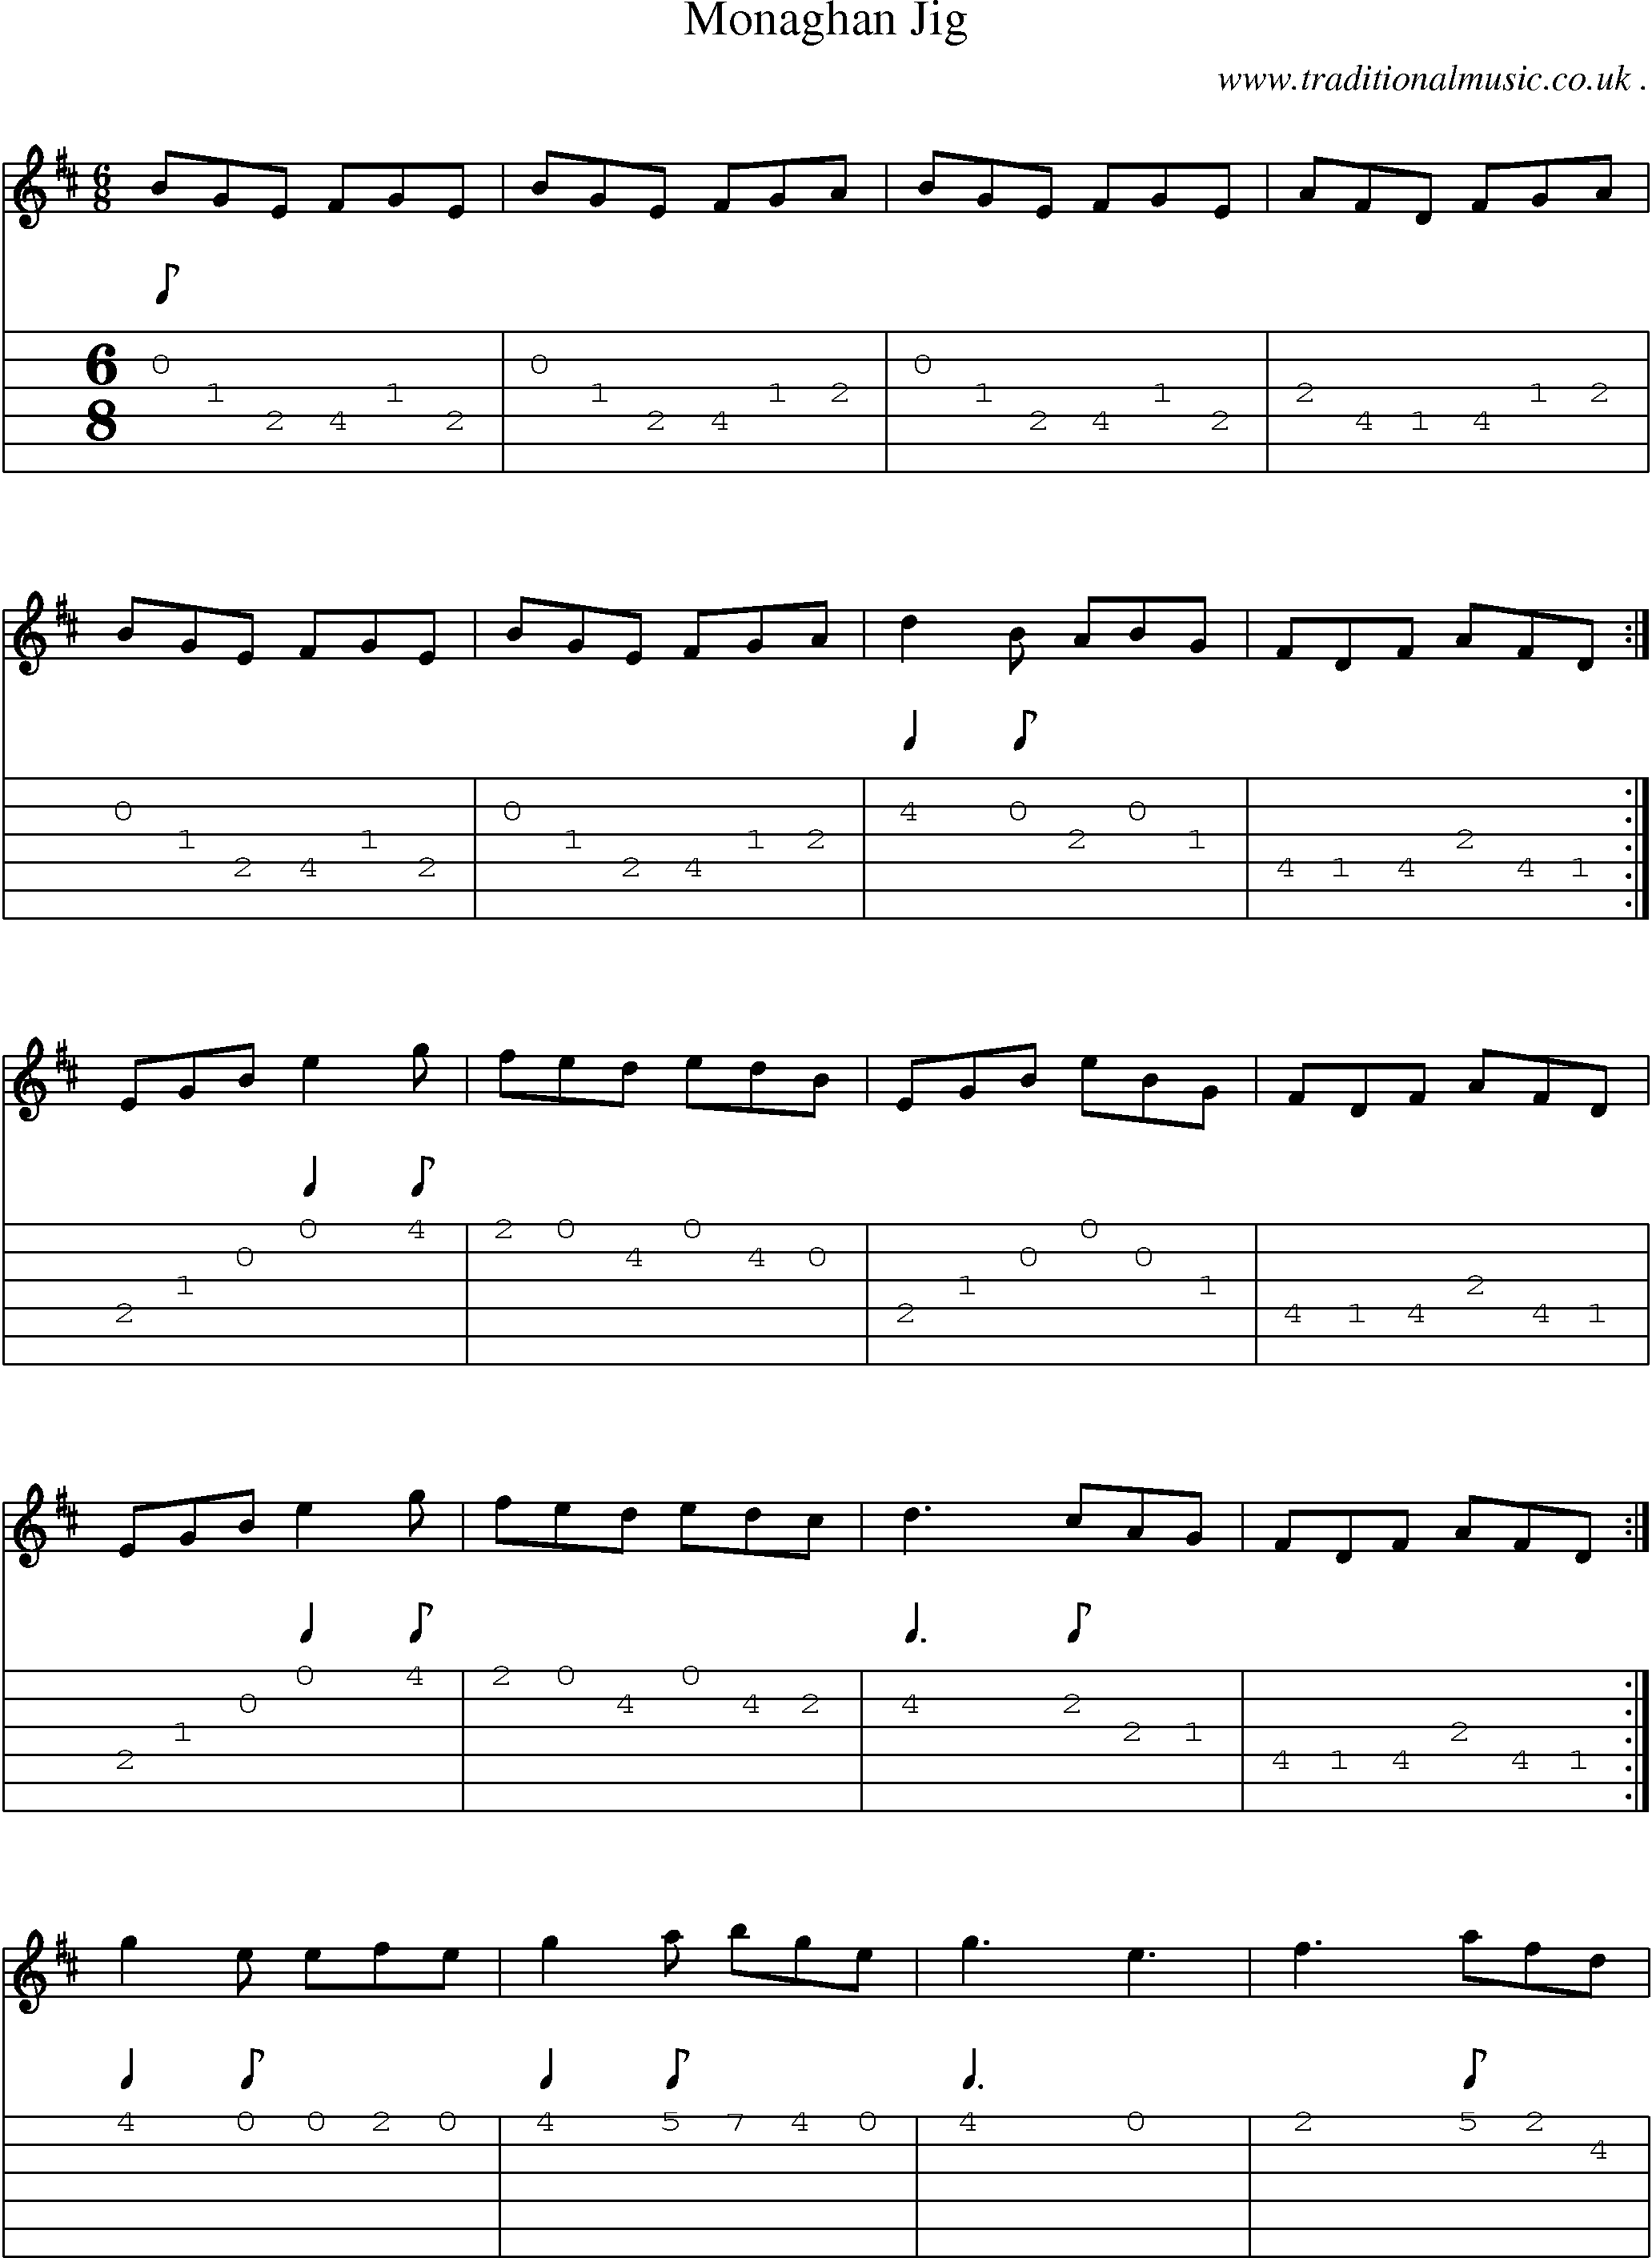 Sheet-Music and Guitar Tabs for Monaghan Jig